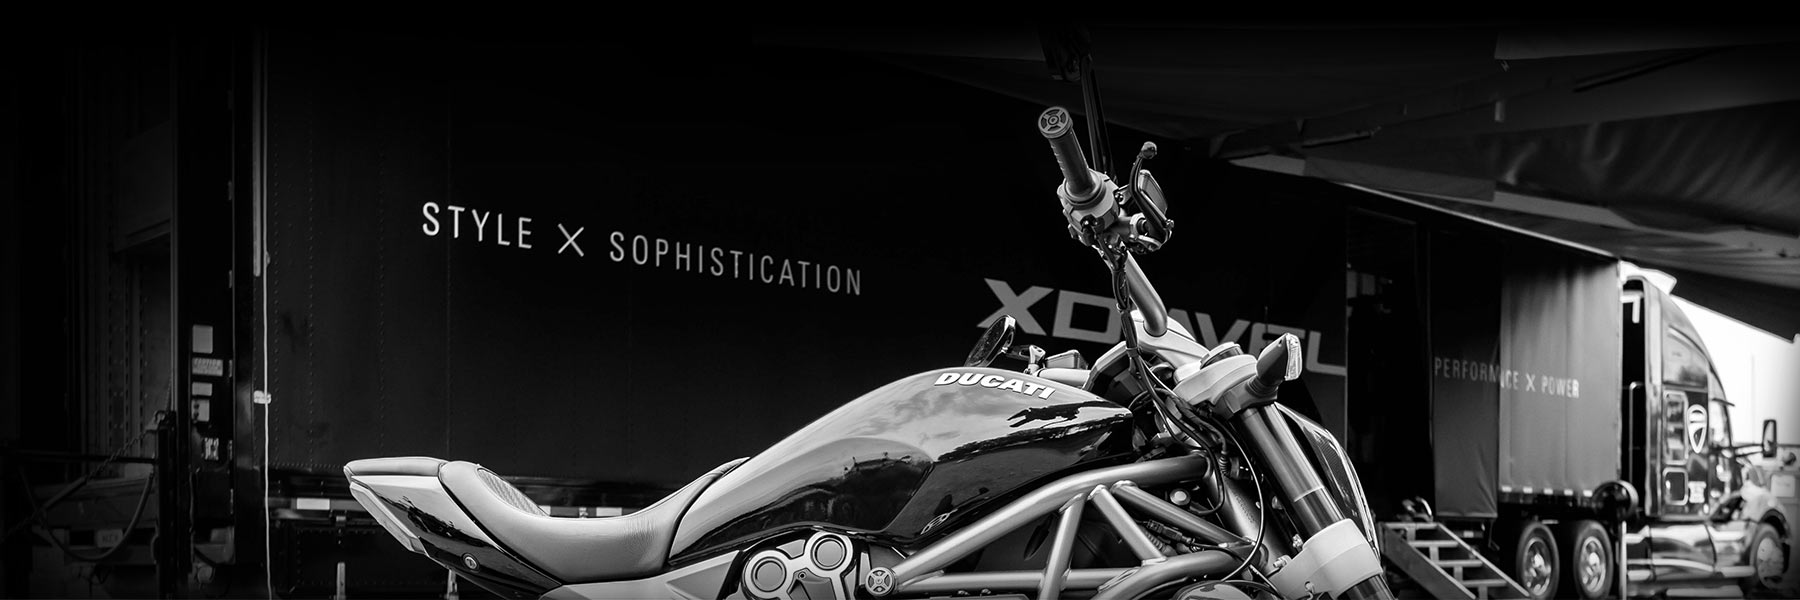 Ducati XDiavel Xperience vehicle and event branding design